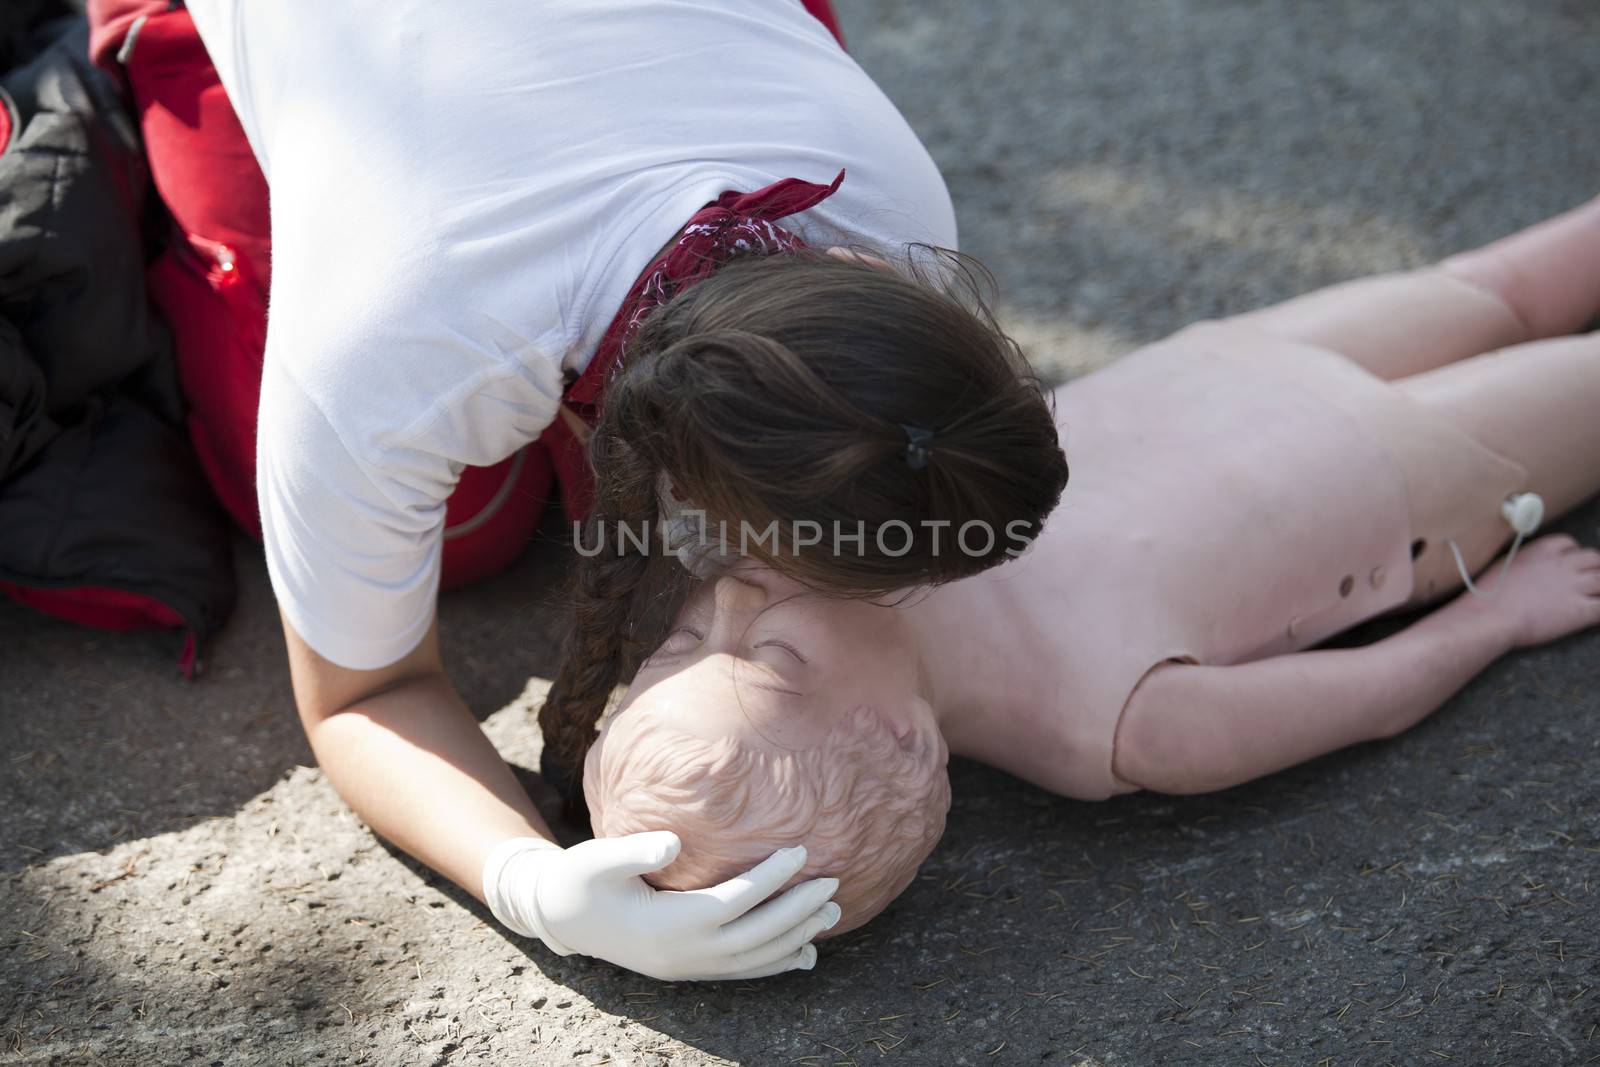 CPR training by wellphoto